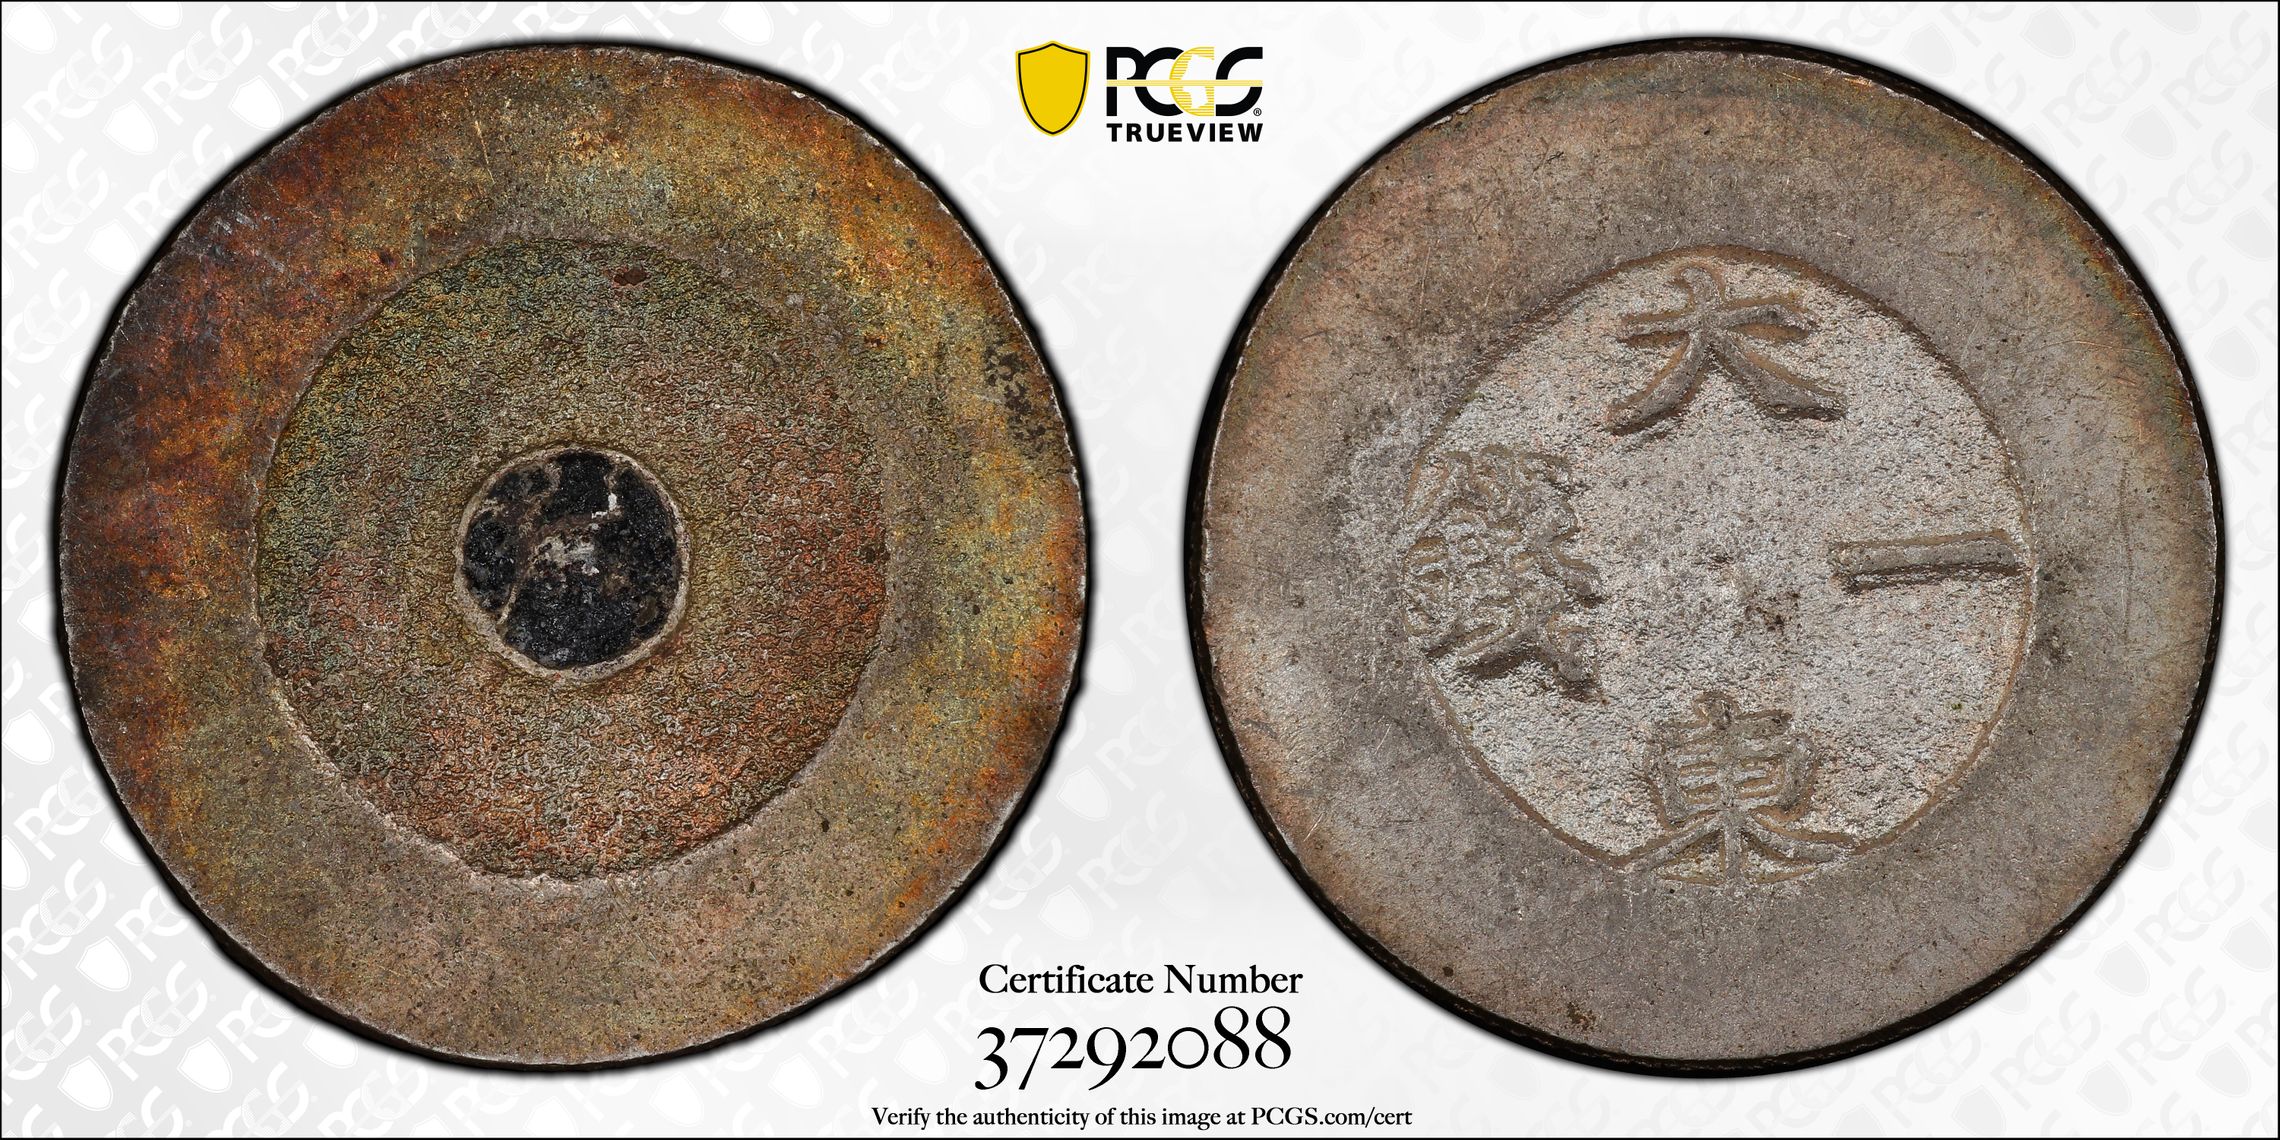 KOREA. Tae Dong Silver Coin. 1 Chon 1882 大東一錢 PCGS MS-62 Gold